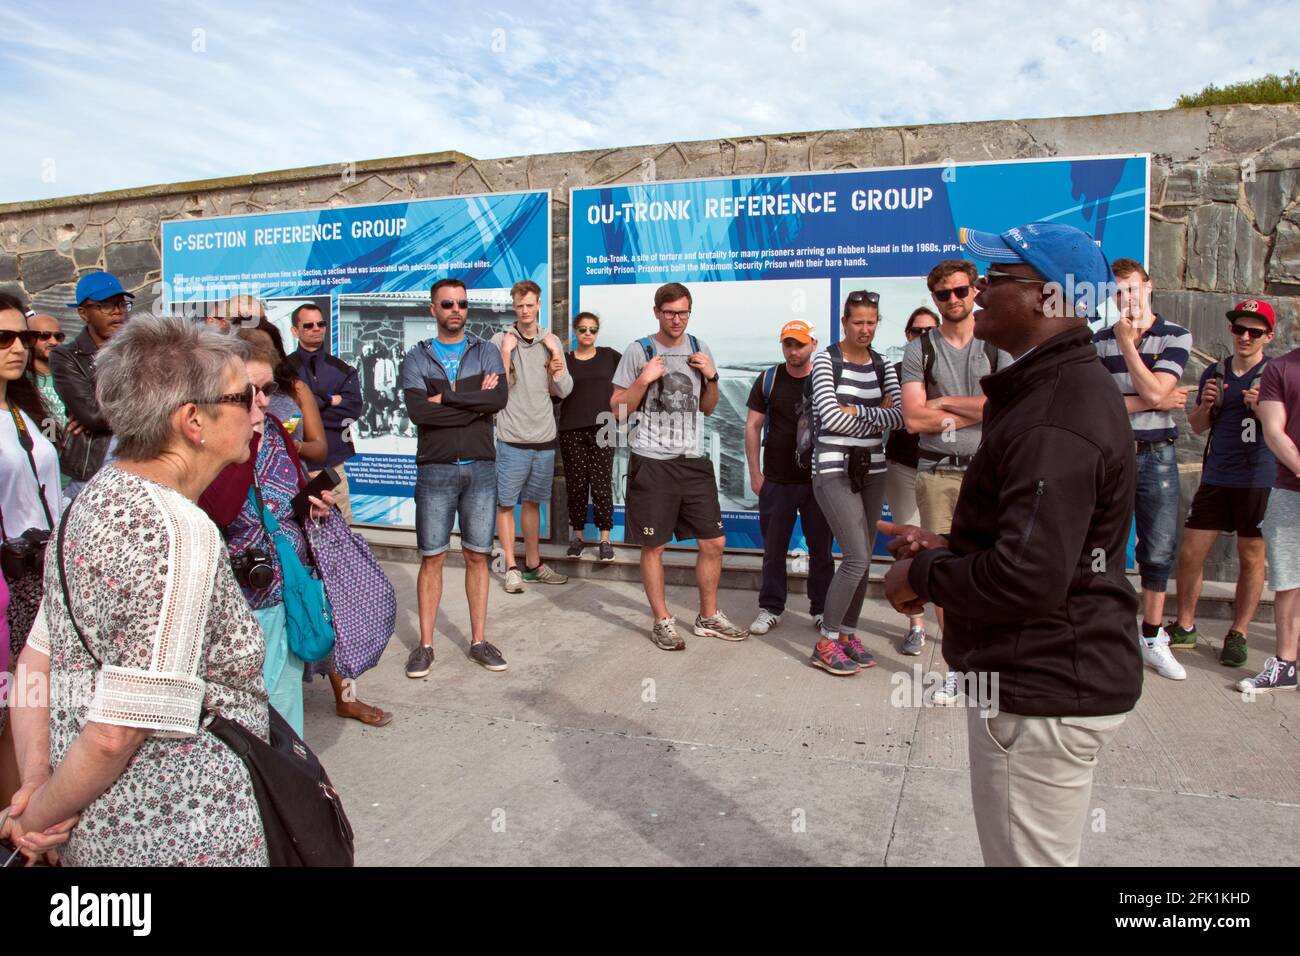 A tour guide speaks to tourists at Robben Island, where Nelson Mandela was imprisoned during apartheid, in Table Bay, Cape Town, South Africa. Stock Photo